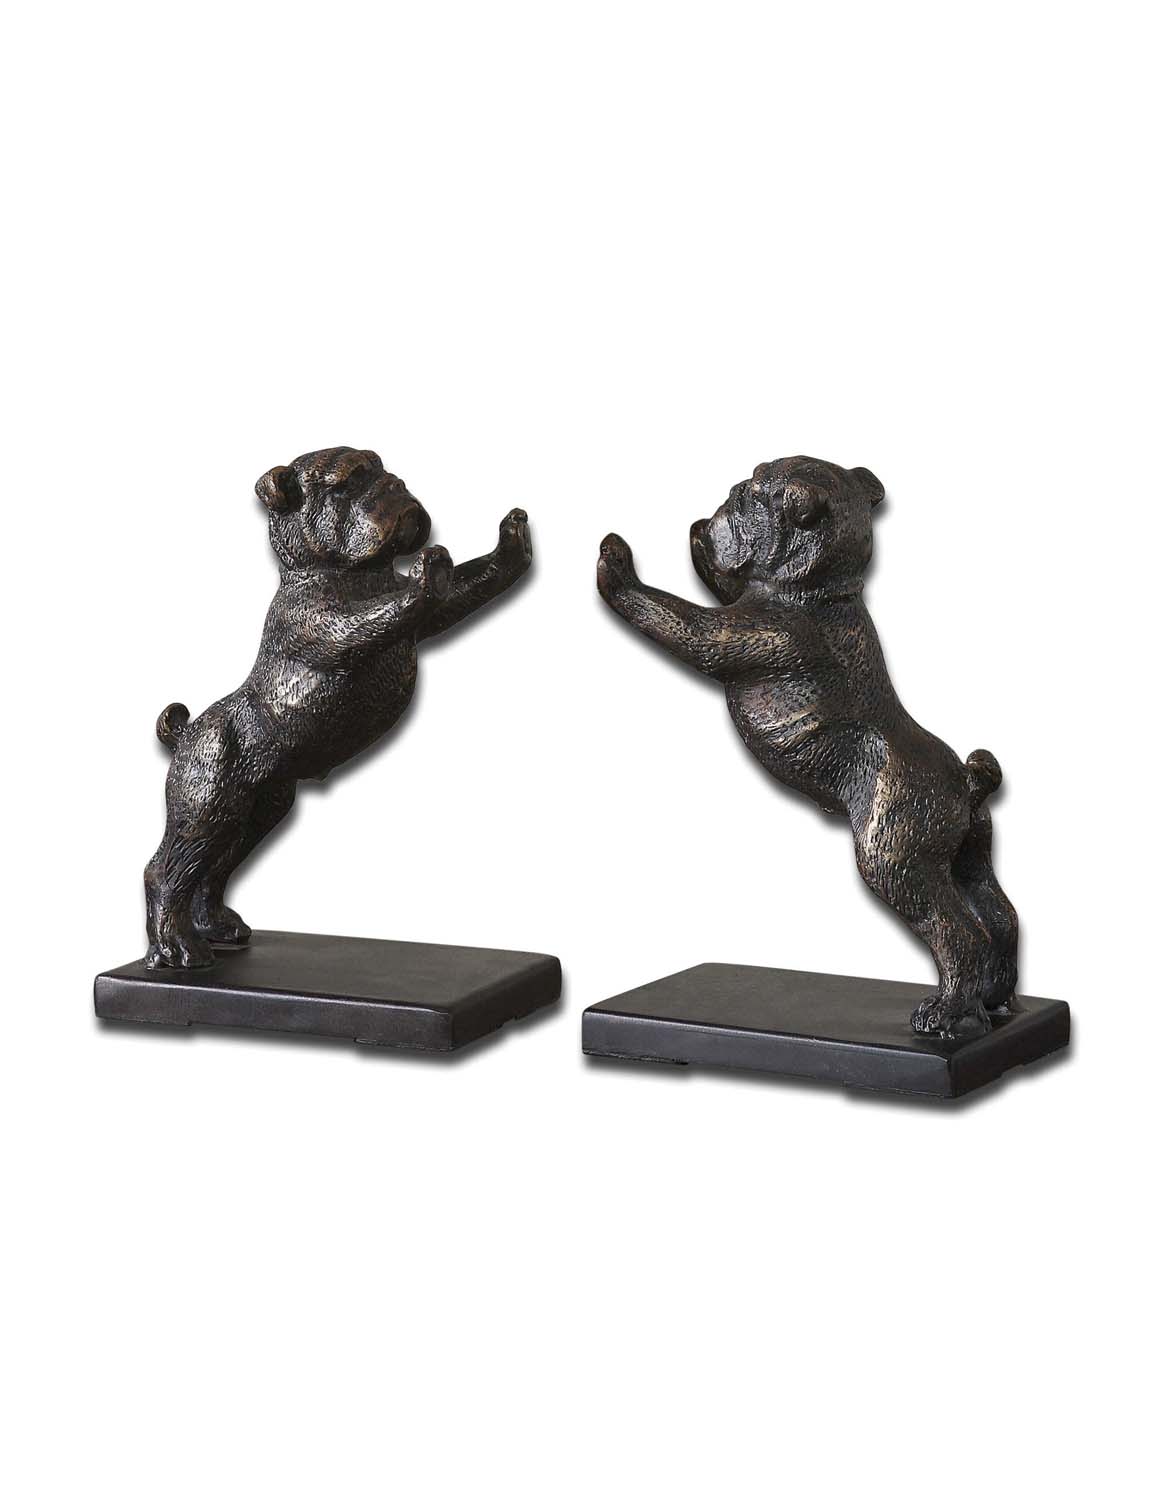 Paw Wow Bookends - Bulldog, Set of 2